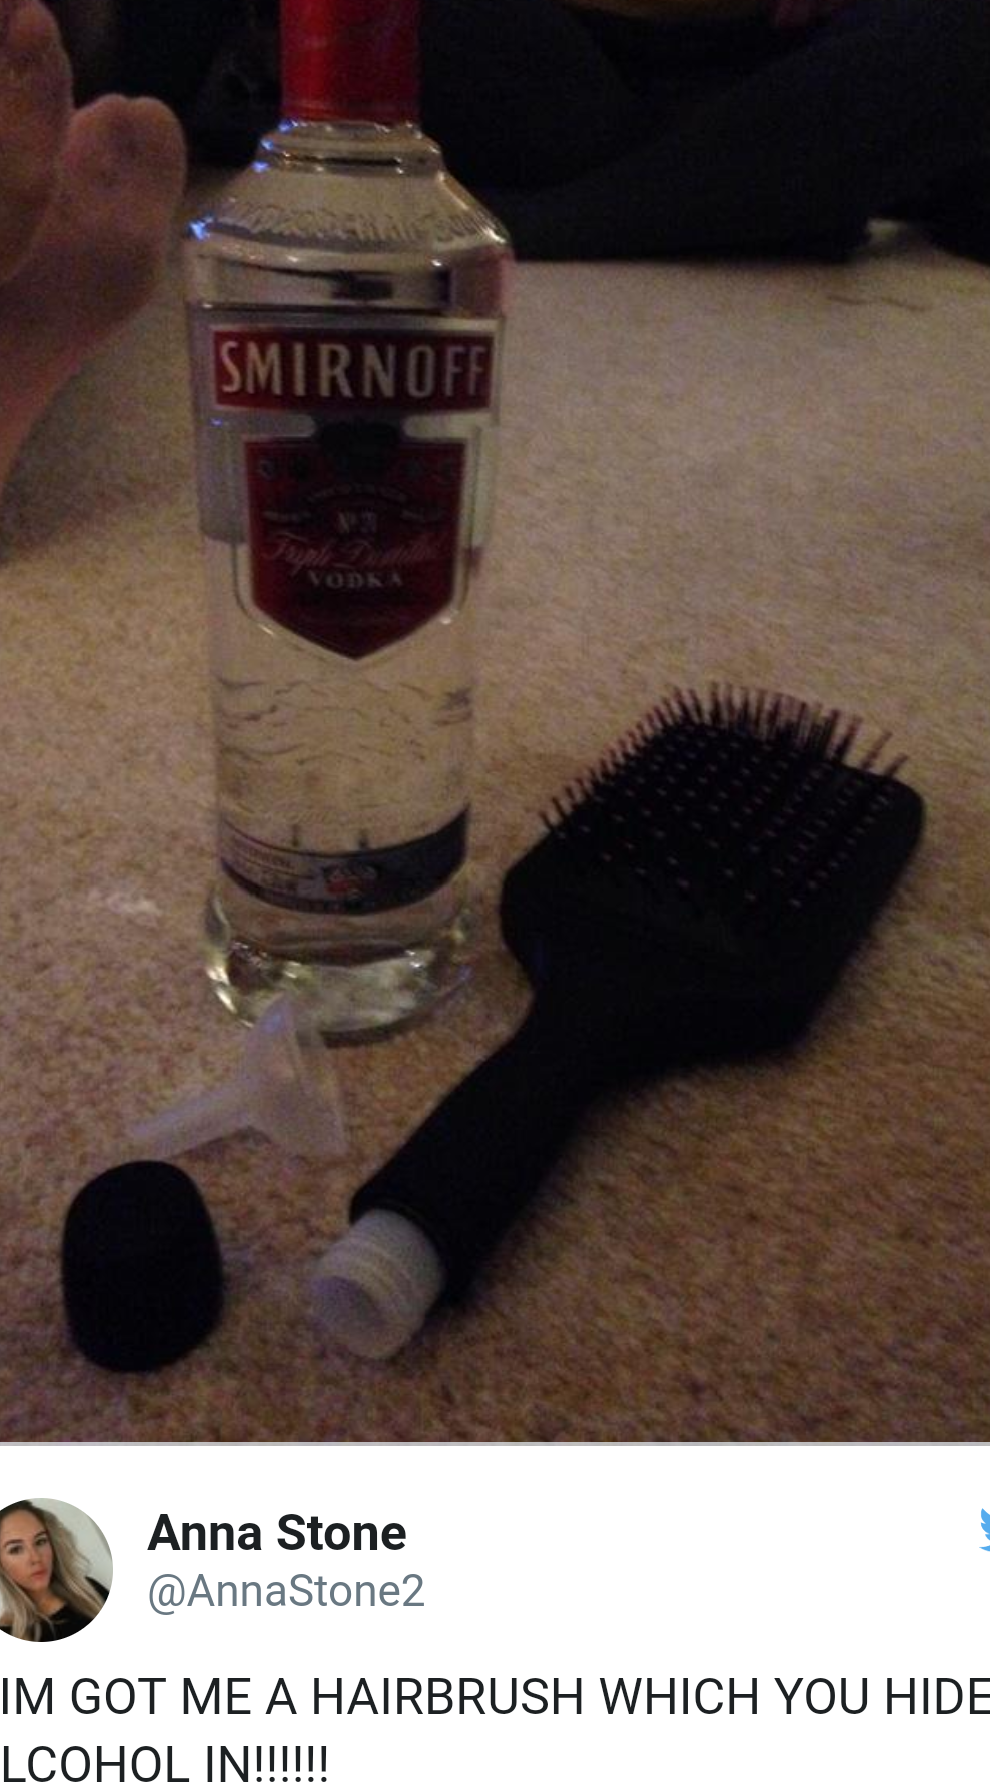 Hairbrush flask for smuggling alcohol.